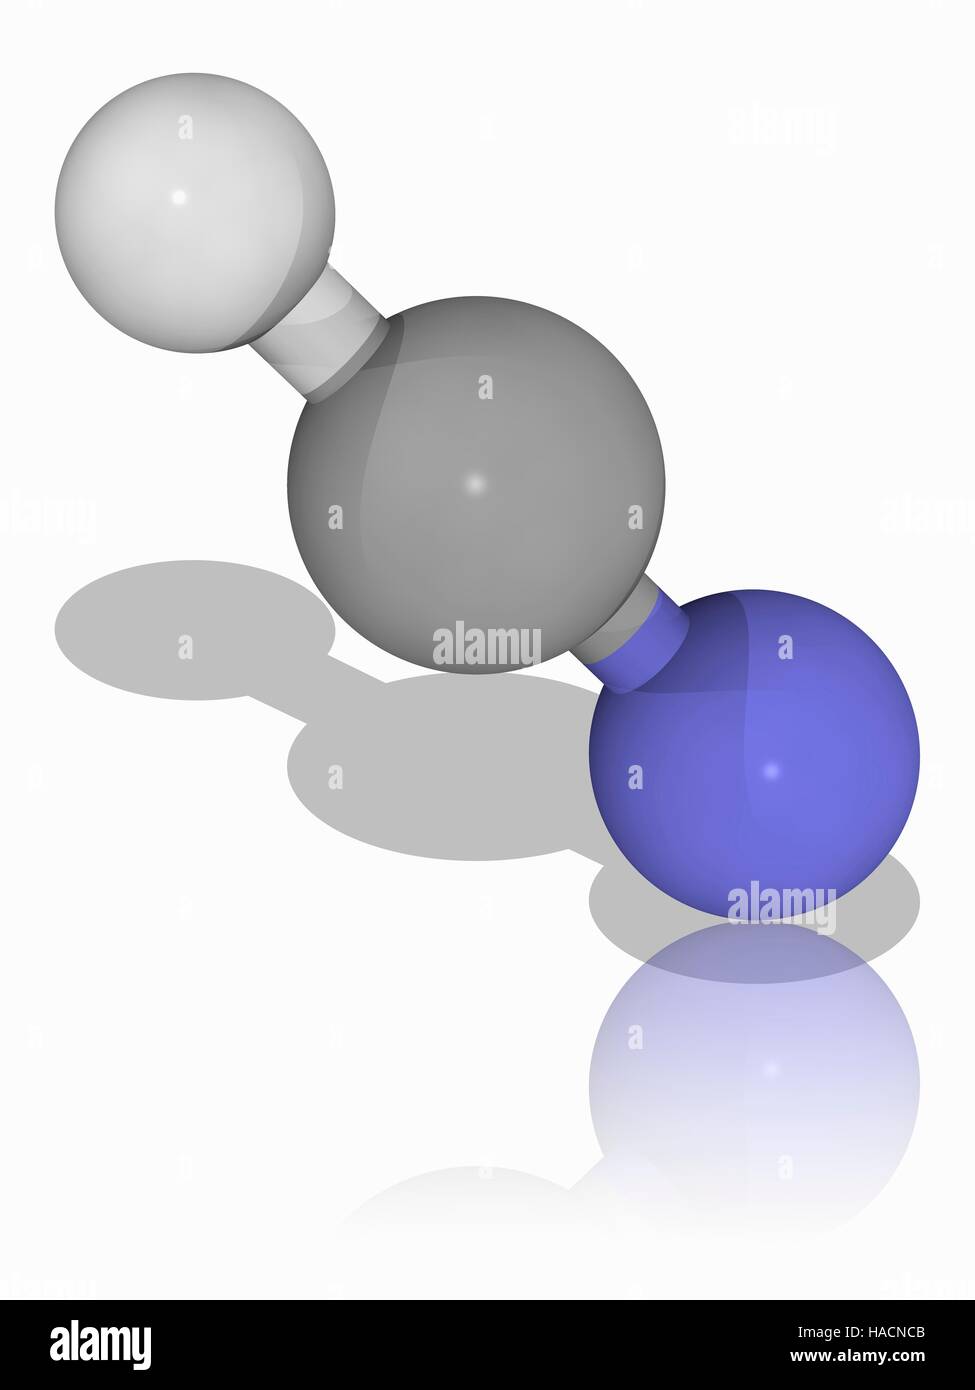 Hydrogen cyanide. Molecular model of the inorganic compound hydrogen cyanide (HCN). This is an extremely poisonous liquid with a burnt almond-like door. It is sometimes referred to as prussic acid. It has widespread applications in the chemical industry. Atoms are represented as spheres and are colour-coded: carbon (grey), hydrogen (white) and nitrogen (blue). Illustration. Stock Photo